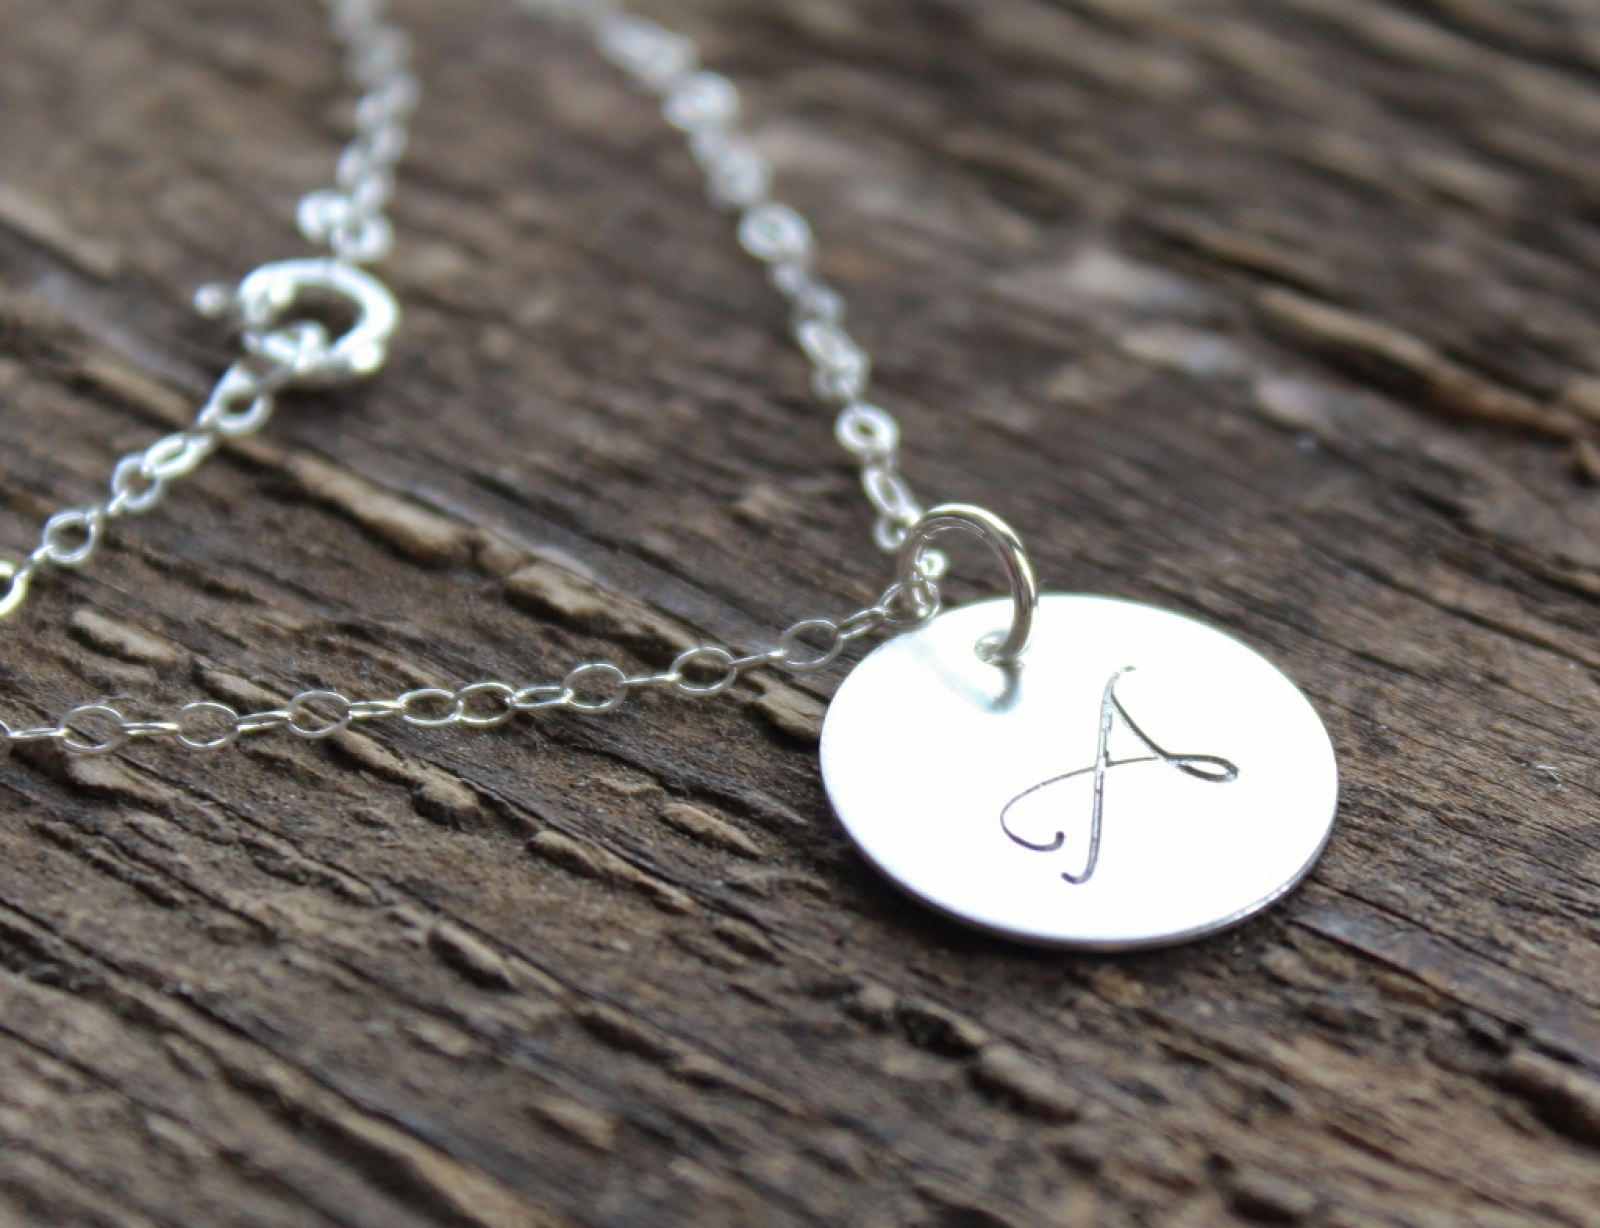 Personalized Silver Monogram Necklace - Bridesmaides Gift Hand Stamped